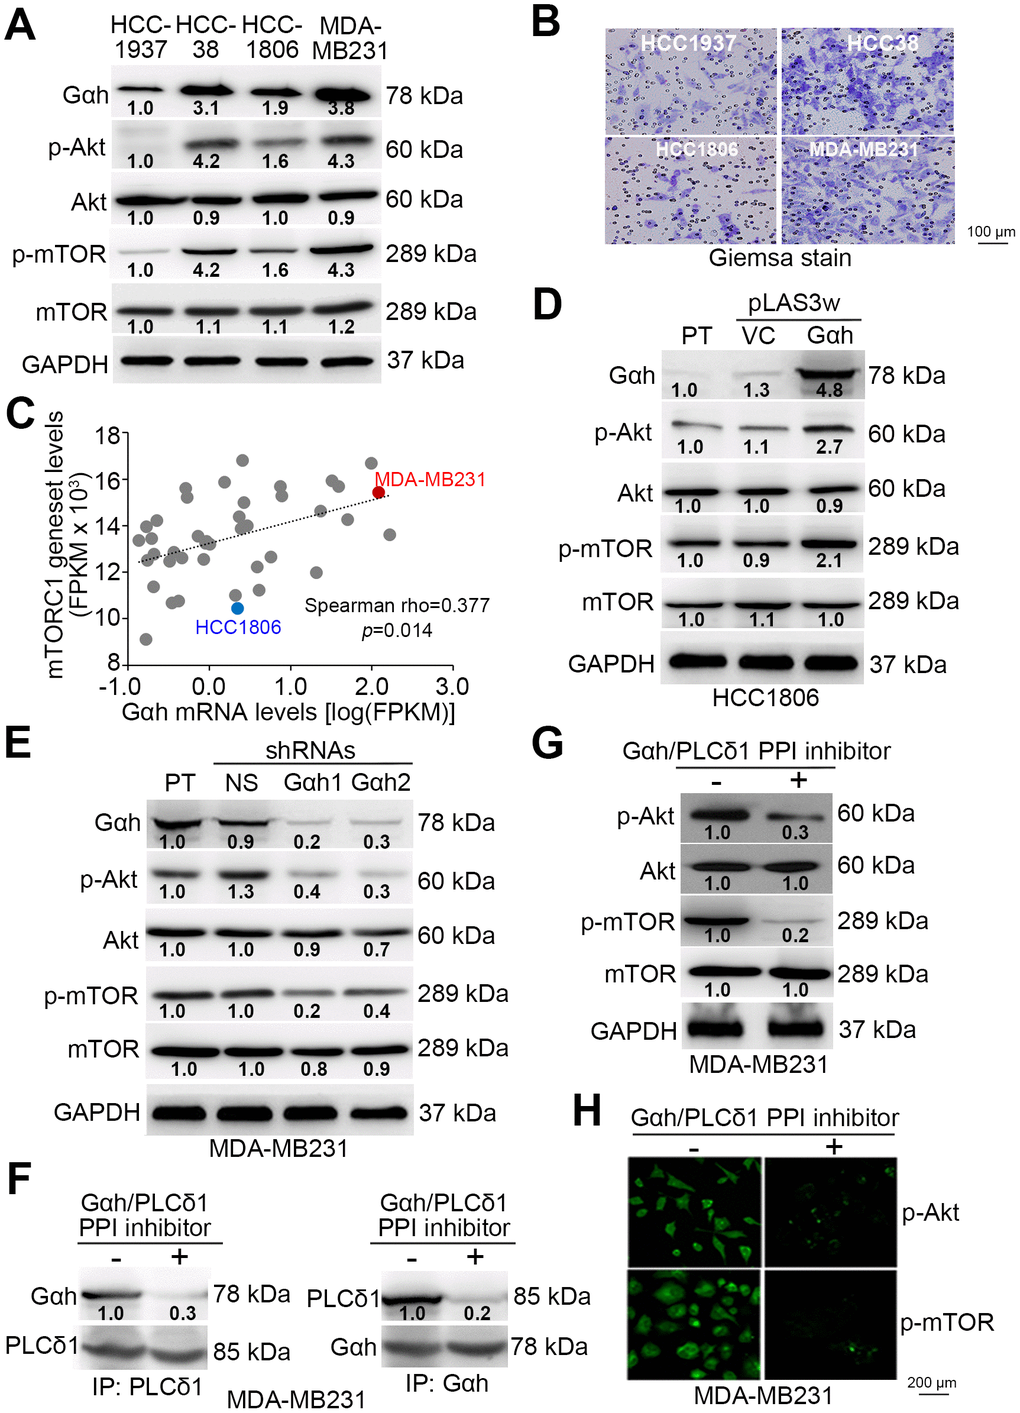 The phosphorylation of Akt and mTORC1 positively correlates with cell invasion ability and is regulated by the Gαh-PLC-δ1 pathway in TNBC cells. (A) Results from the western blot analysis for the Gαh, phosphorylated Akt (p-Akt), Akt, p-mTOR, mTOR and GAPDH proteins derived from the indicated TNBC cell lines. (B) Giemsa staining of the invaded cells of the tested TNBC cell lines after a 16-hour invasion assay. (C) Correlation of mRNA expression levels between Gαh and the mTORC1 gene set in a panel of breast cancer cell lines derived from the Cancer Cell Line Encyclopedia (CCLE) database. Spearman’s correlation test was used to estimate the statistical significance. (D–E) Results from the western blot analysis for the Gαh, p-Akt, Akt, p-mTOR, mTOR and GAPDH proteins derived from the parental (PT) HCC1806 cells without (vector control, VC) or with Gαh overexpression (D) and the parental MDA-MD231 cells without (nonsilenced, NS) or with Gαh knocked down using two independent shRNA clones (E). (F–H) MDA-MD231 cells treated without or with 10 μM Gαh/PLC-δ1 protein-protein interaction (PPI) inhibitor for 2 hours were subjected to a reciprocal immunoprecipitation for detecting the PPI of Gαh/PLC-δ1 (F), Western blot analysis for measuring the protein levels of p-Akt, Akt, p-mTOR, mTOR and GAPDH (G), and immunofluorescent staining for visualizing the intracellular protein levels of p-Akt and p-mTOR (H). In A, D, E, G, GAPDH was used as an internal control of protein loading. The protein intensities of representative blots from three independent experiments were normalized by GAPDH levels and presented as a ratio to the control group.